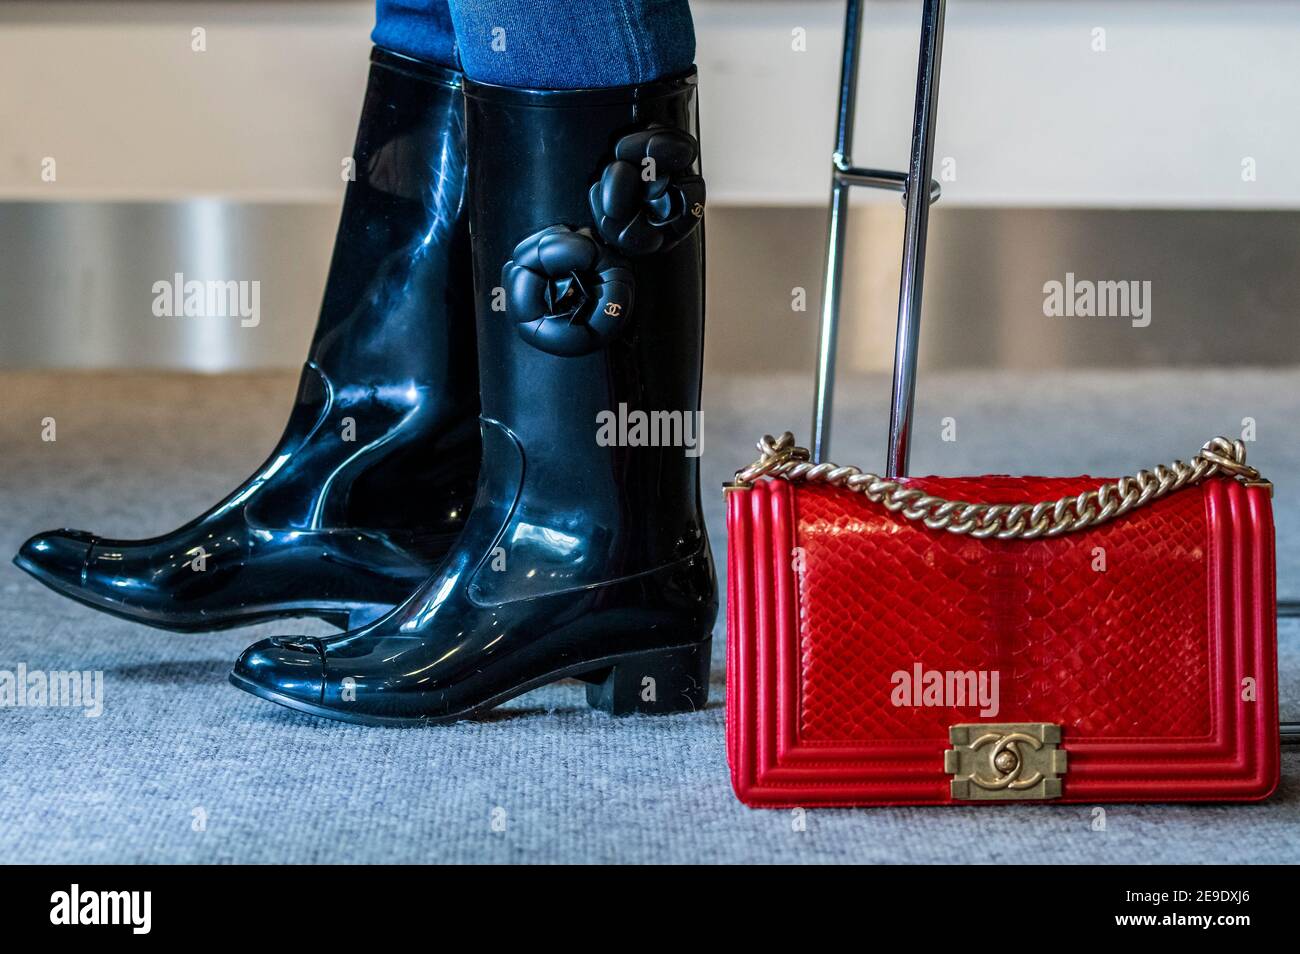 London, UK. 4th Feb, 2021. Designer Wellington Boots by Chanel with  Camellia design (part of a set of 2 pairs) est £200-300 with a Red Python  Medium Boy Bag, Chanel, c. 2014